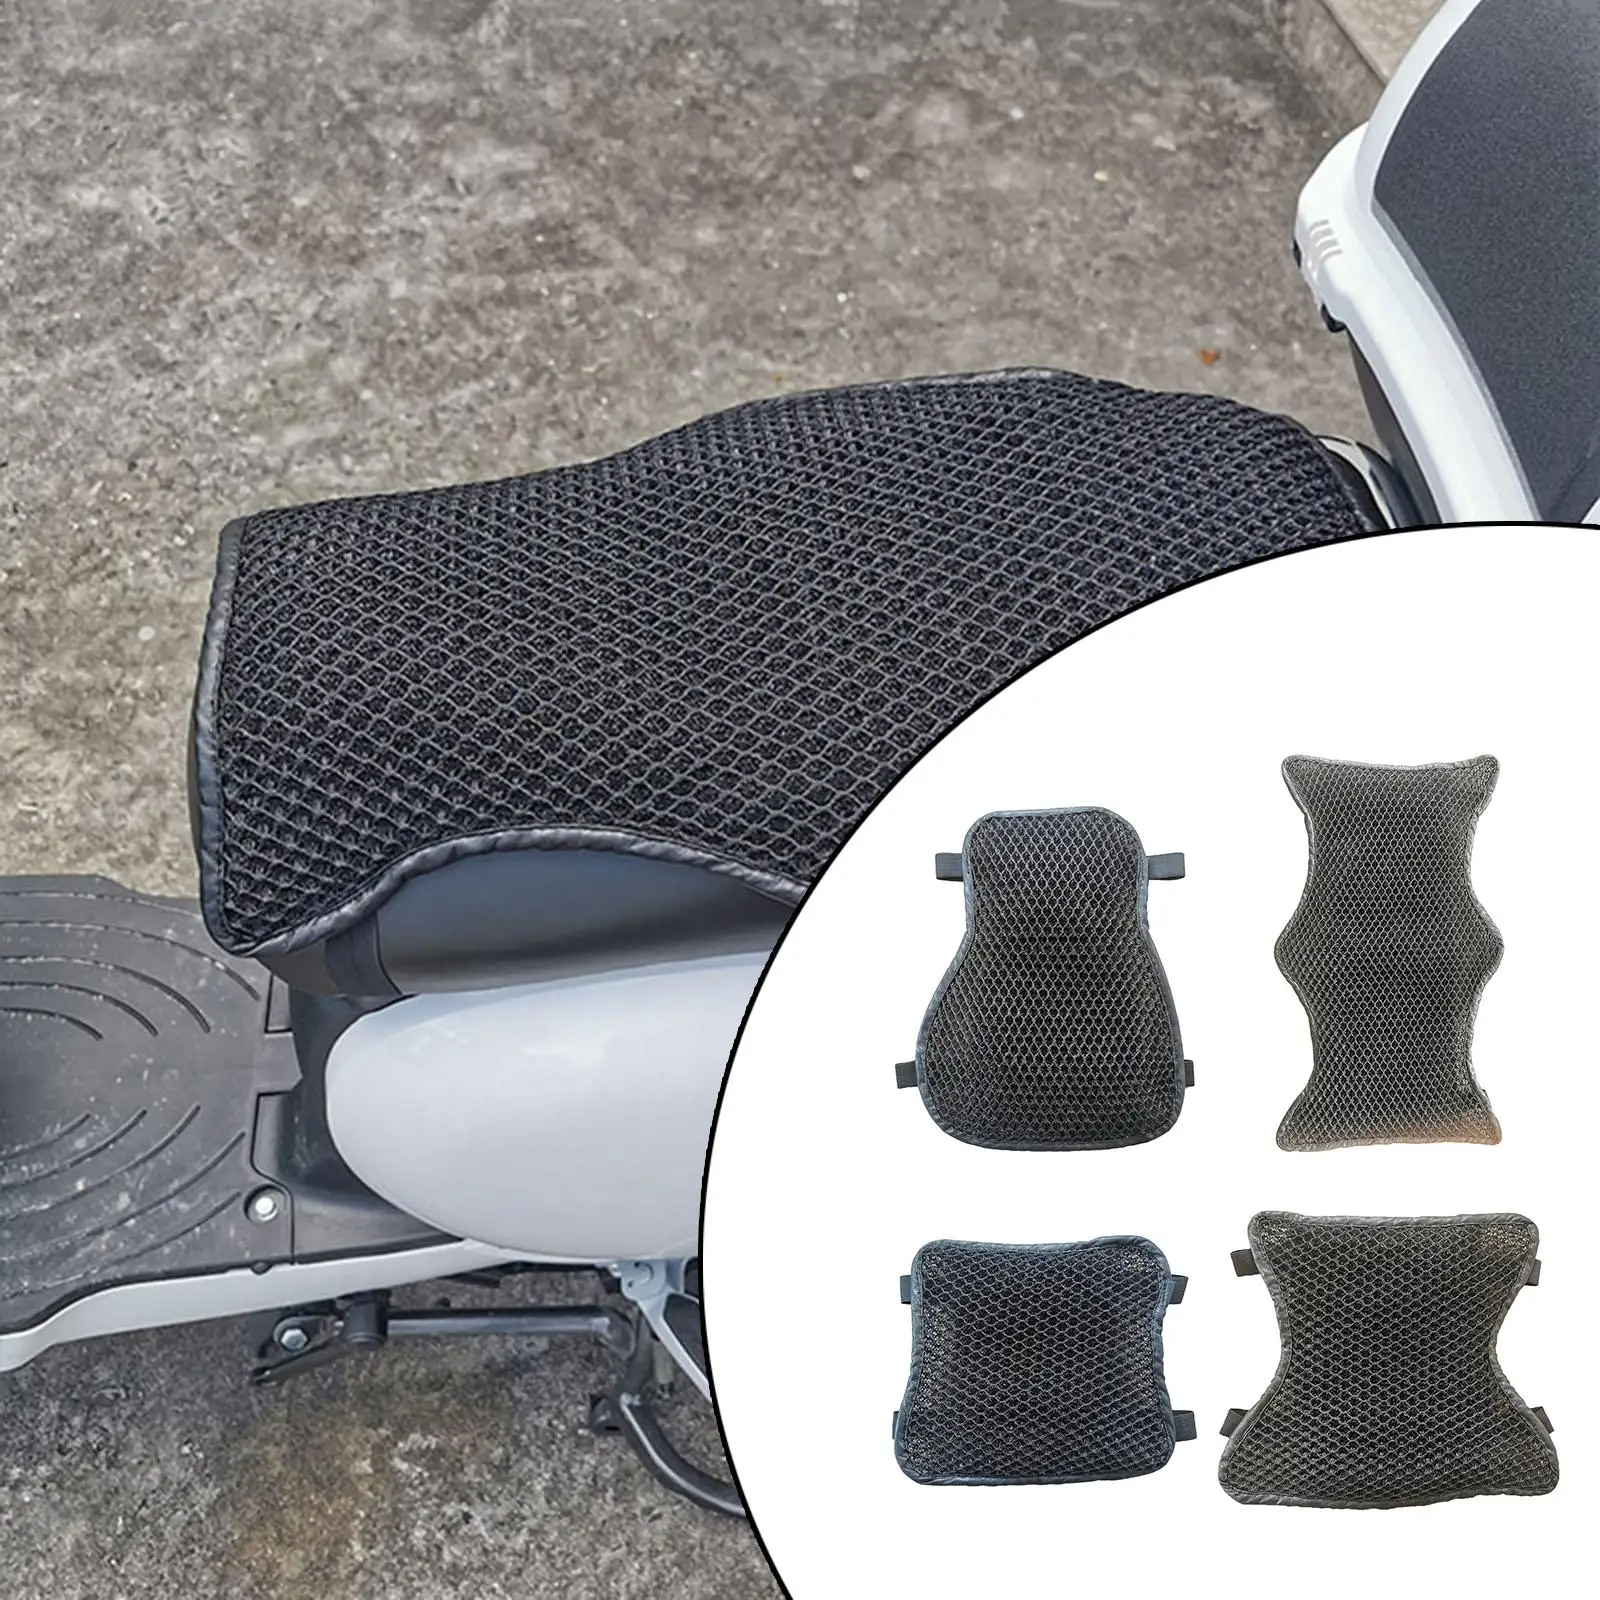 Motorcycle Seat   Double Layer Comfortable Cover Fits for Cruiser